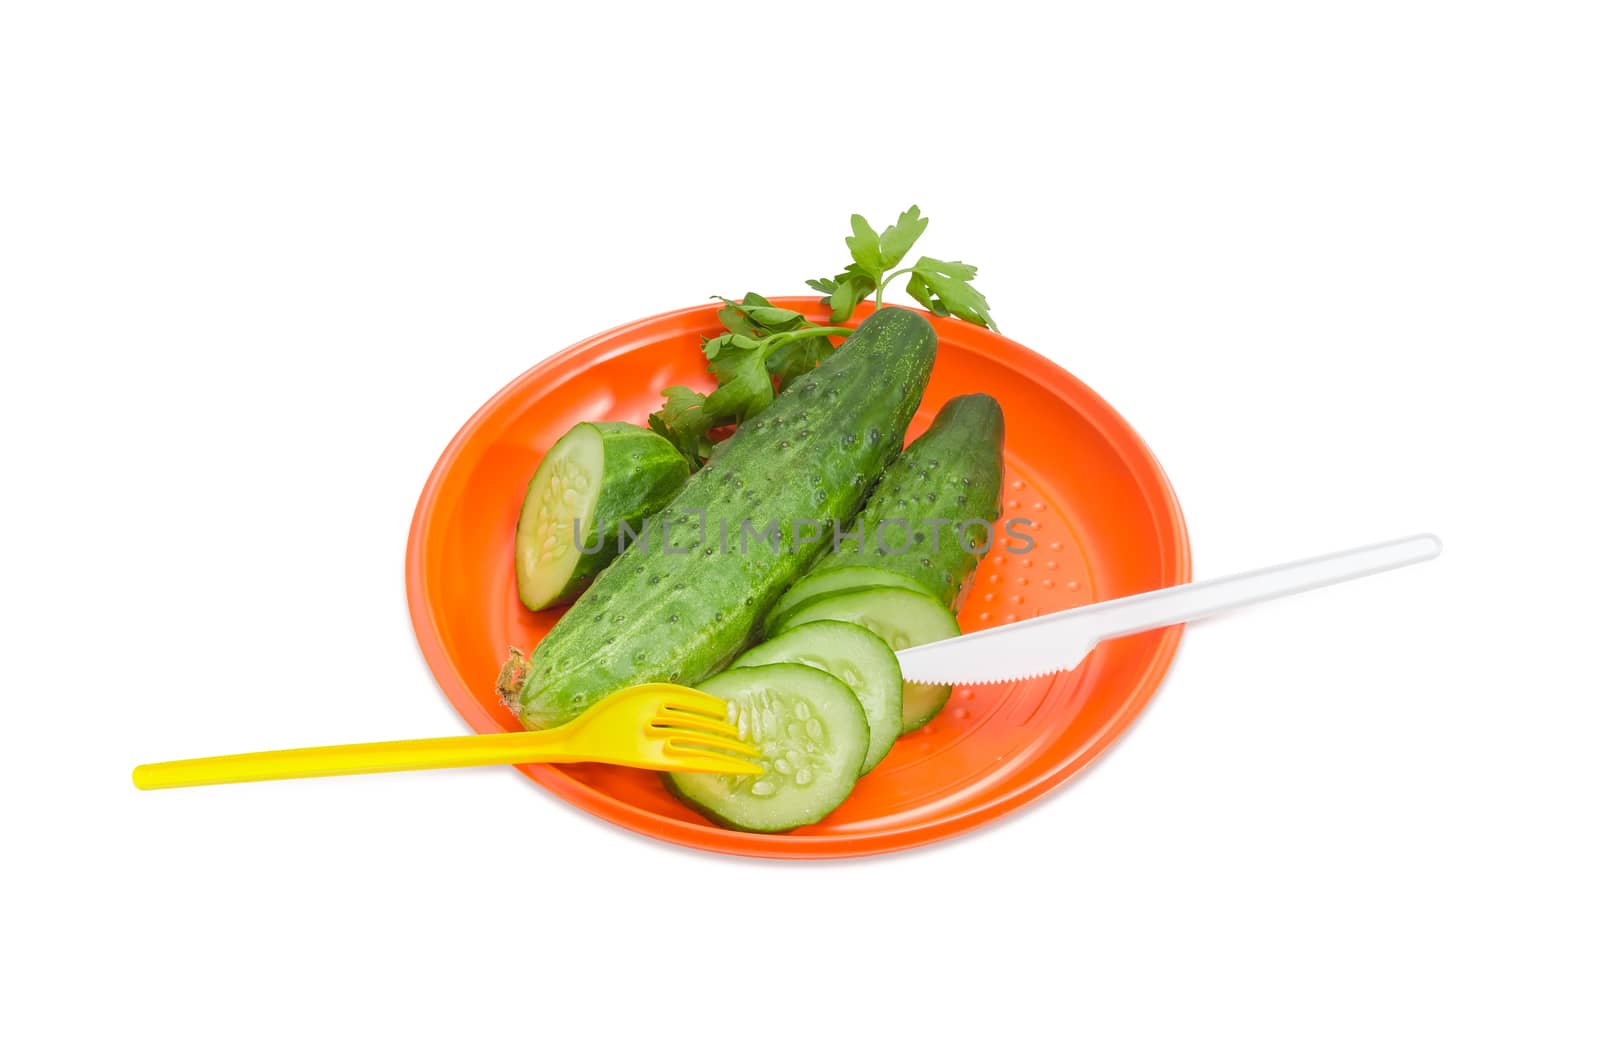 Cucumbers on the disposable plastic plate, fork and knife by anmbph